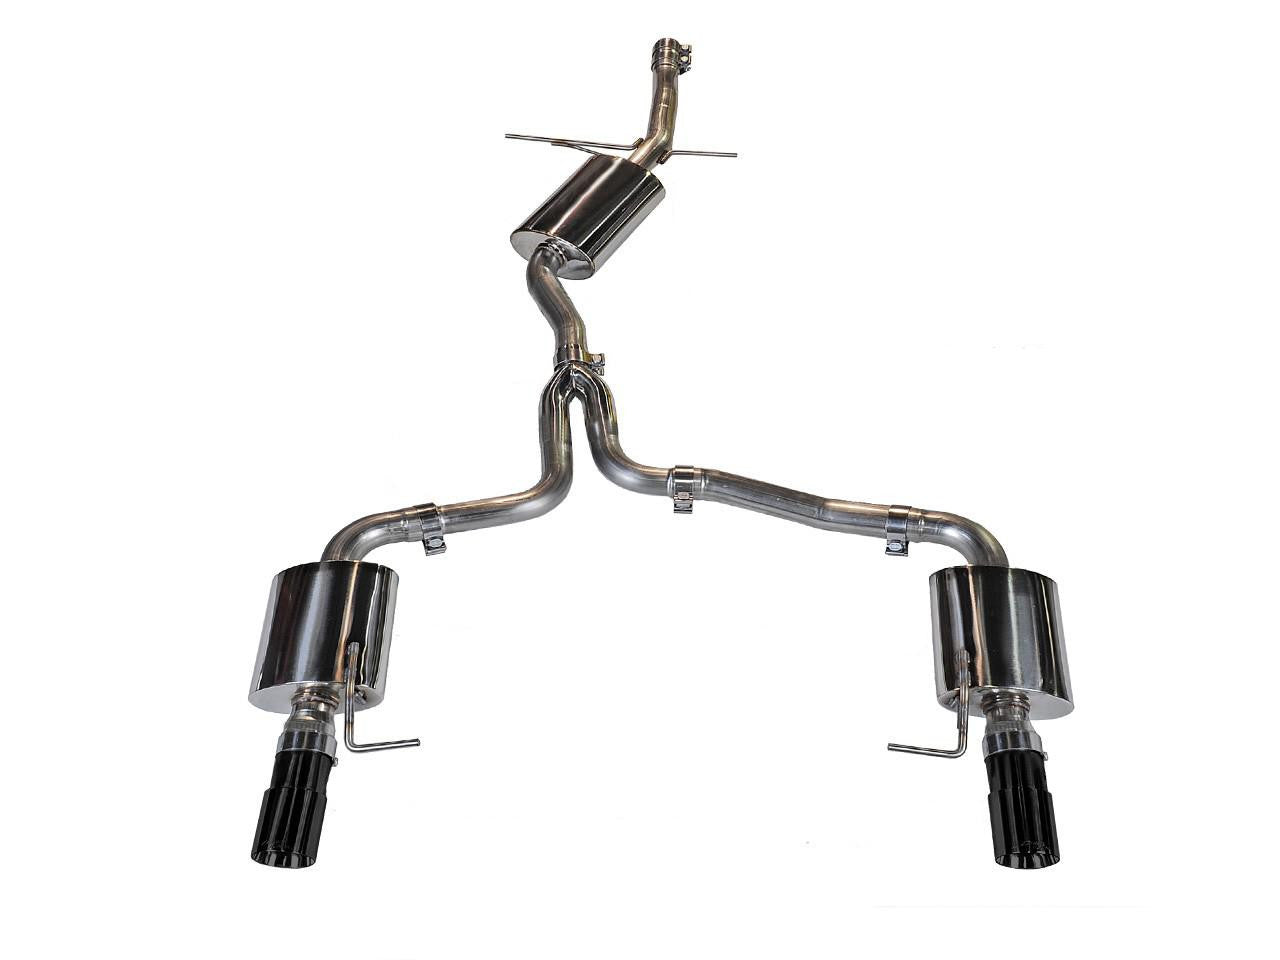 AWE Tuning AWE Touring Edition Exhaust for 8R Q5 2.0T - Diamond Black Tips 3015-33030 